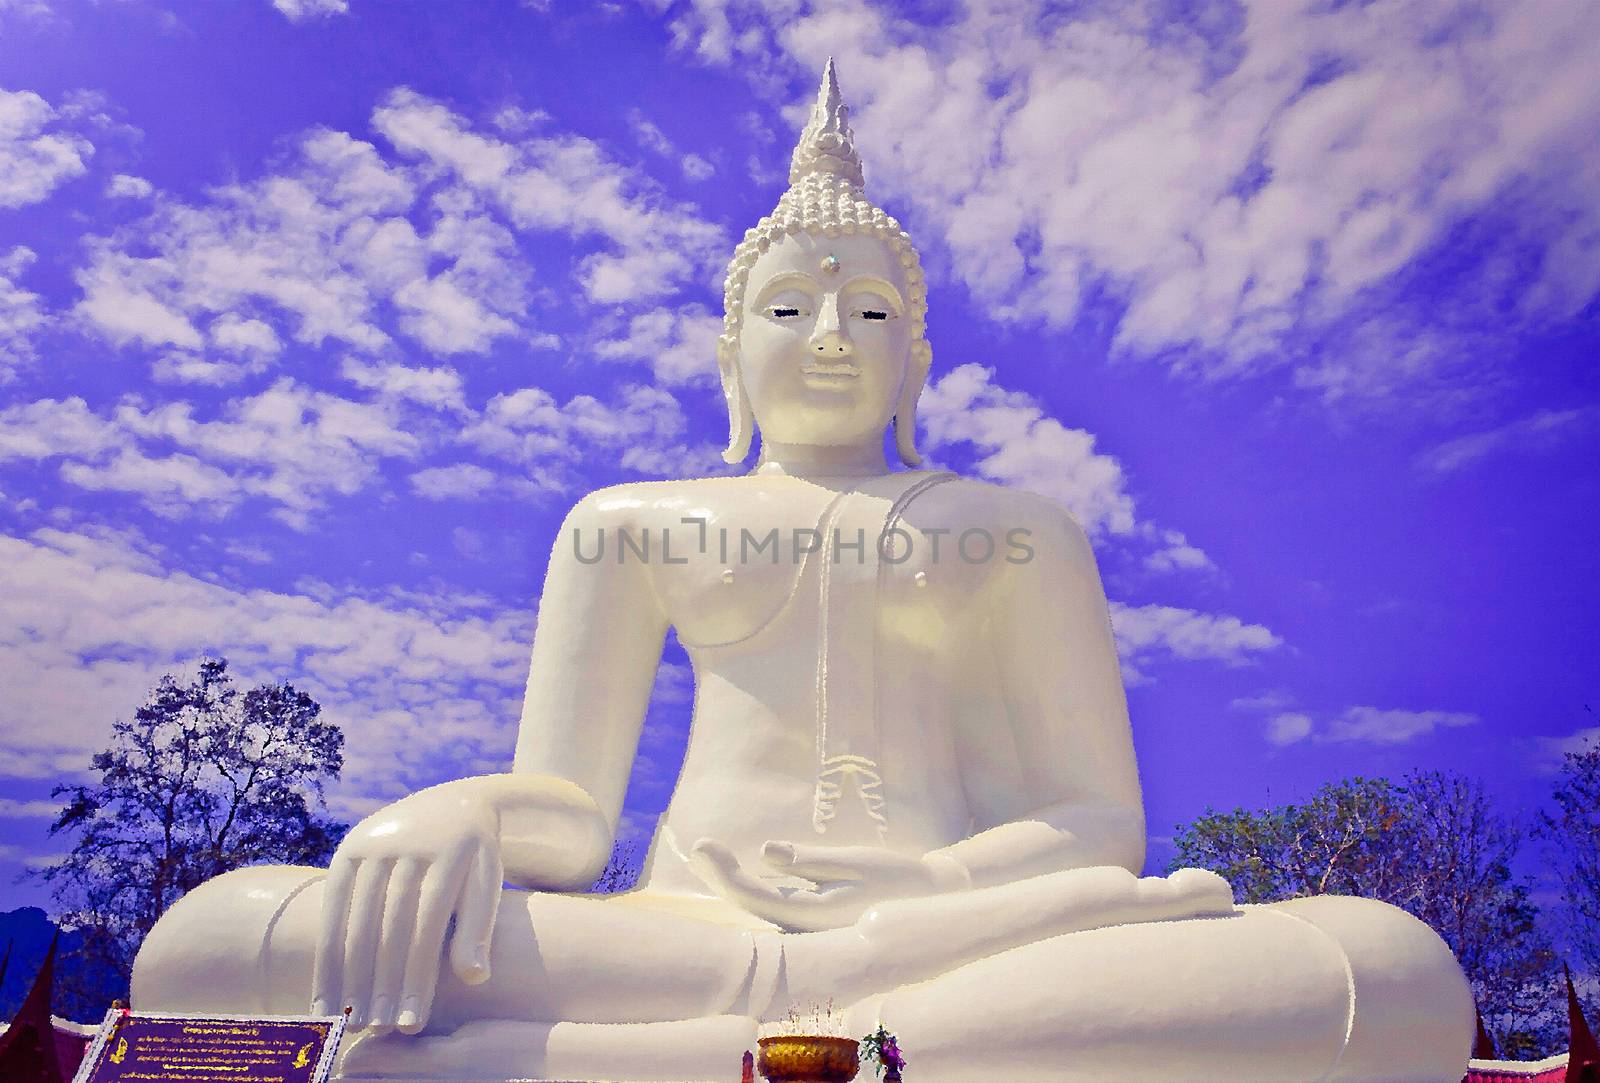 The white seated buddha image in Cloudy Blue Sky Background place at Wat Thatanon, Thongphapoom district, Kanchanaburi province, Thailand.